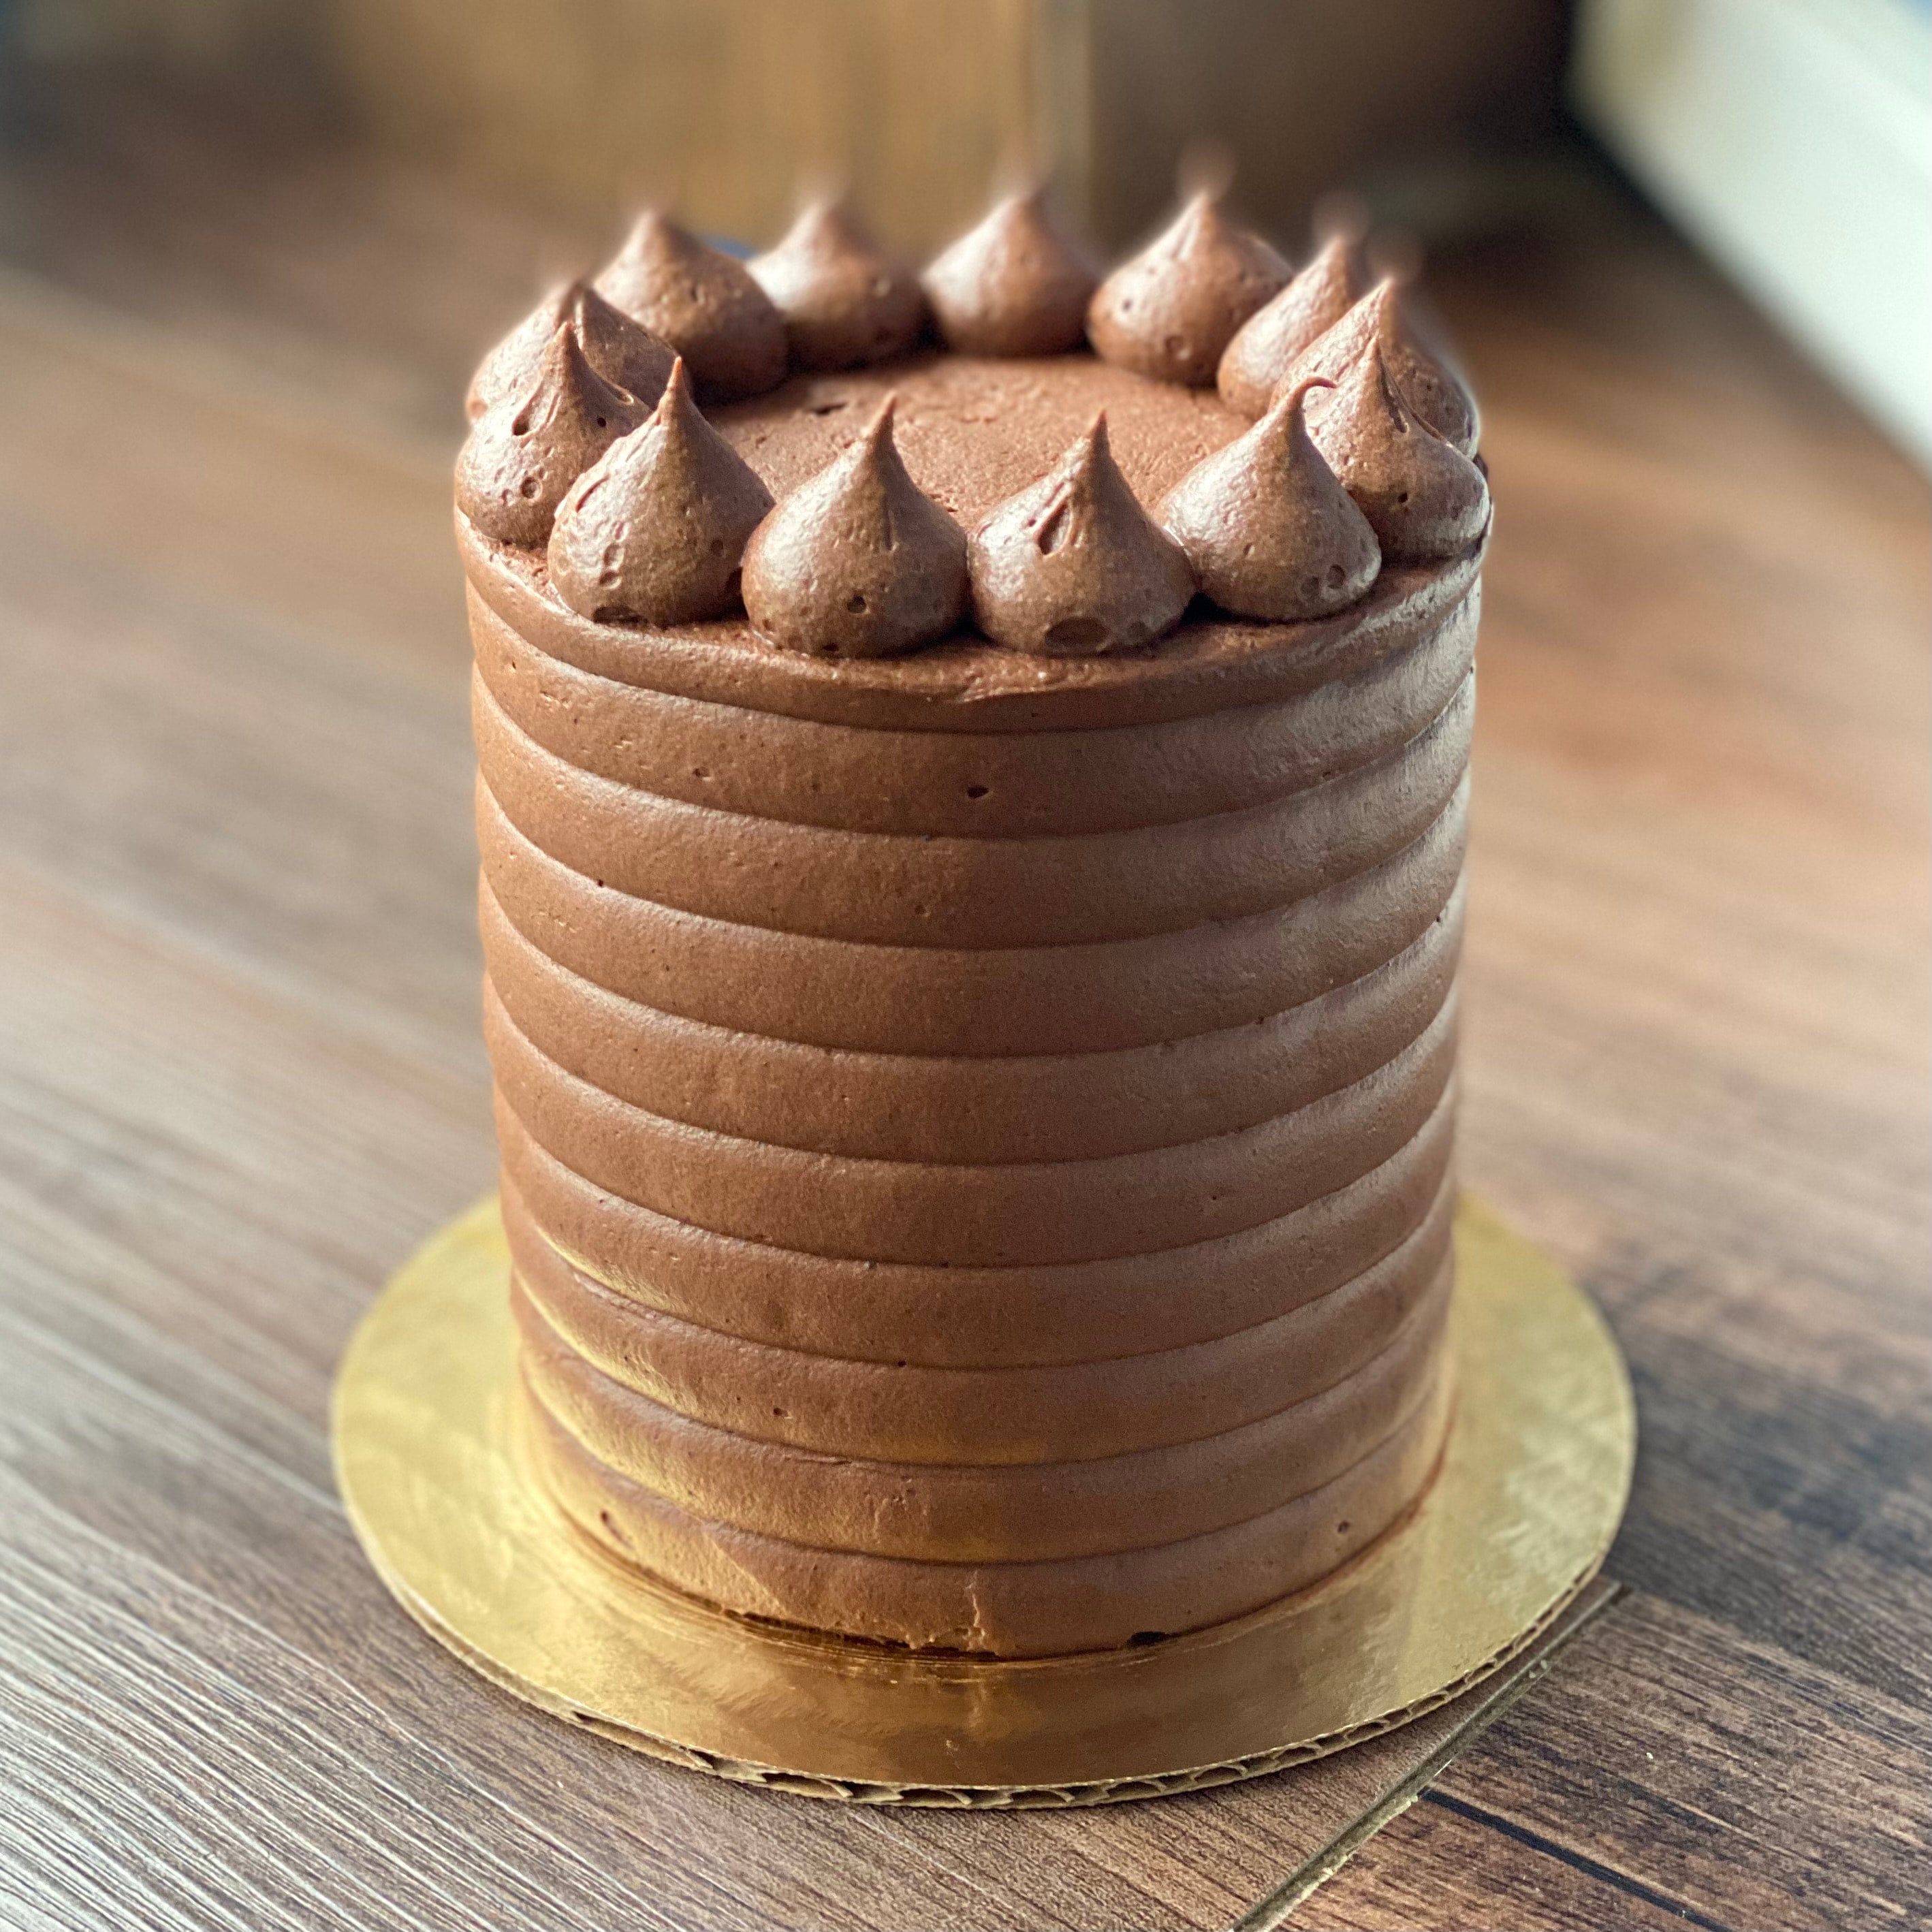 Baked Delights - Chocoholic cake 🍫🍫🍫 7inch 4 layer chocolate cake with  cookies n cream buttercream, chocolate drip and loaded with lots of  chocolate 🤤🤤 Feb is now fully booked for cakes,